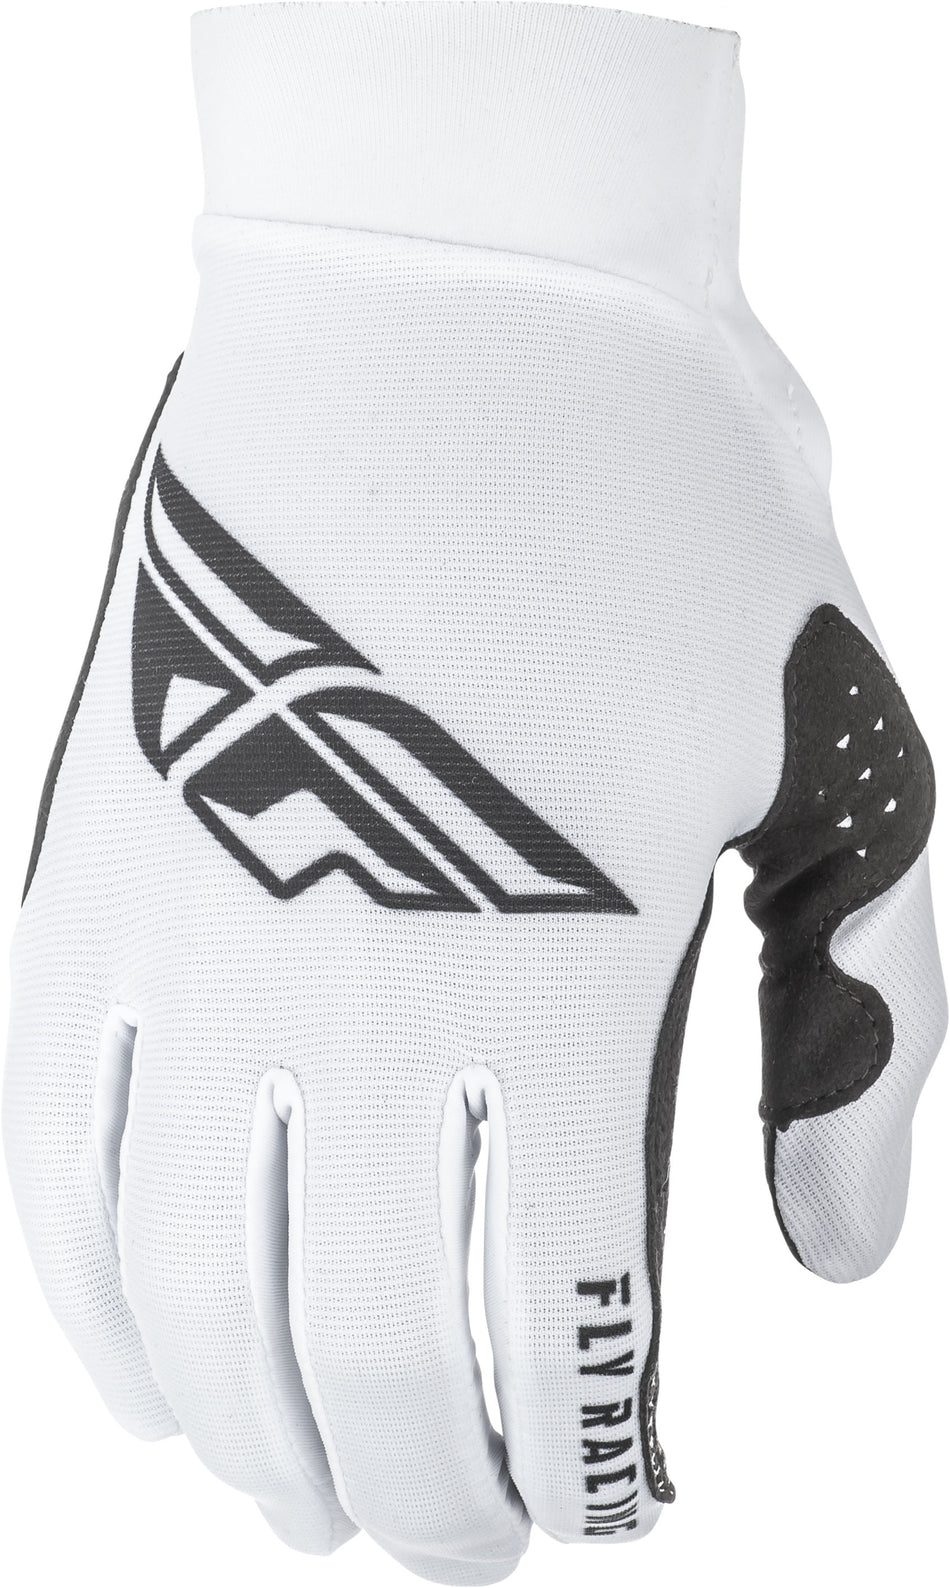 FLY RACING Pro Lite Gloves White Sz 11 372-81411